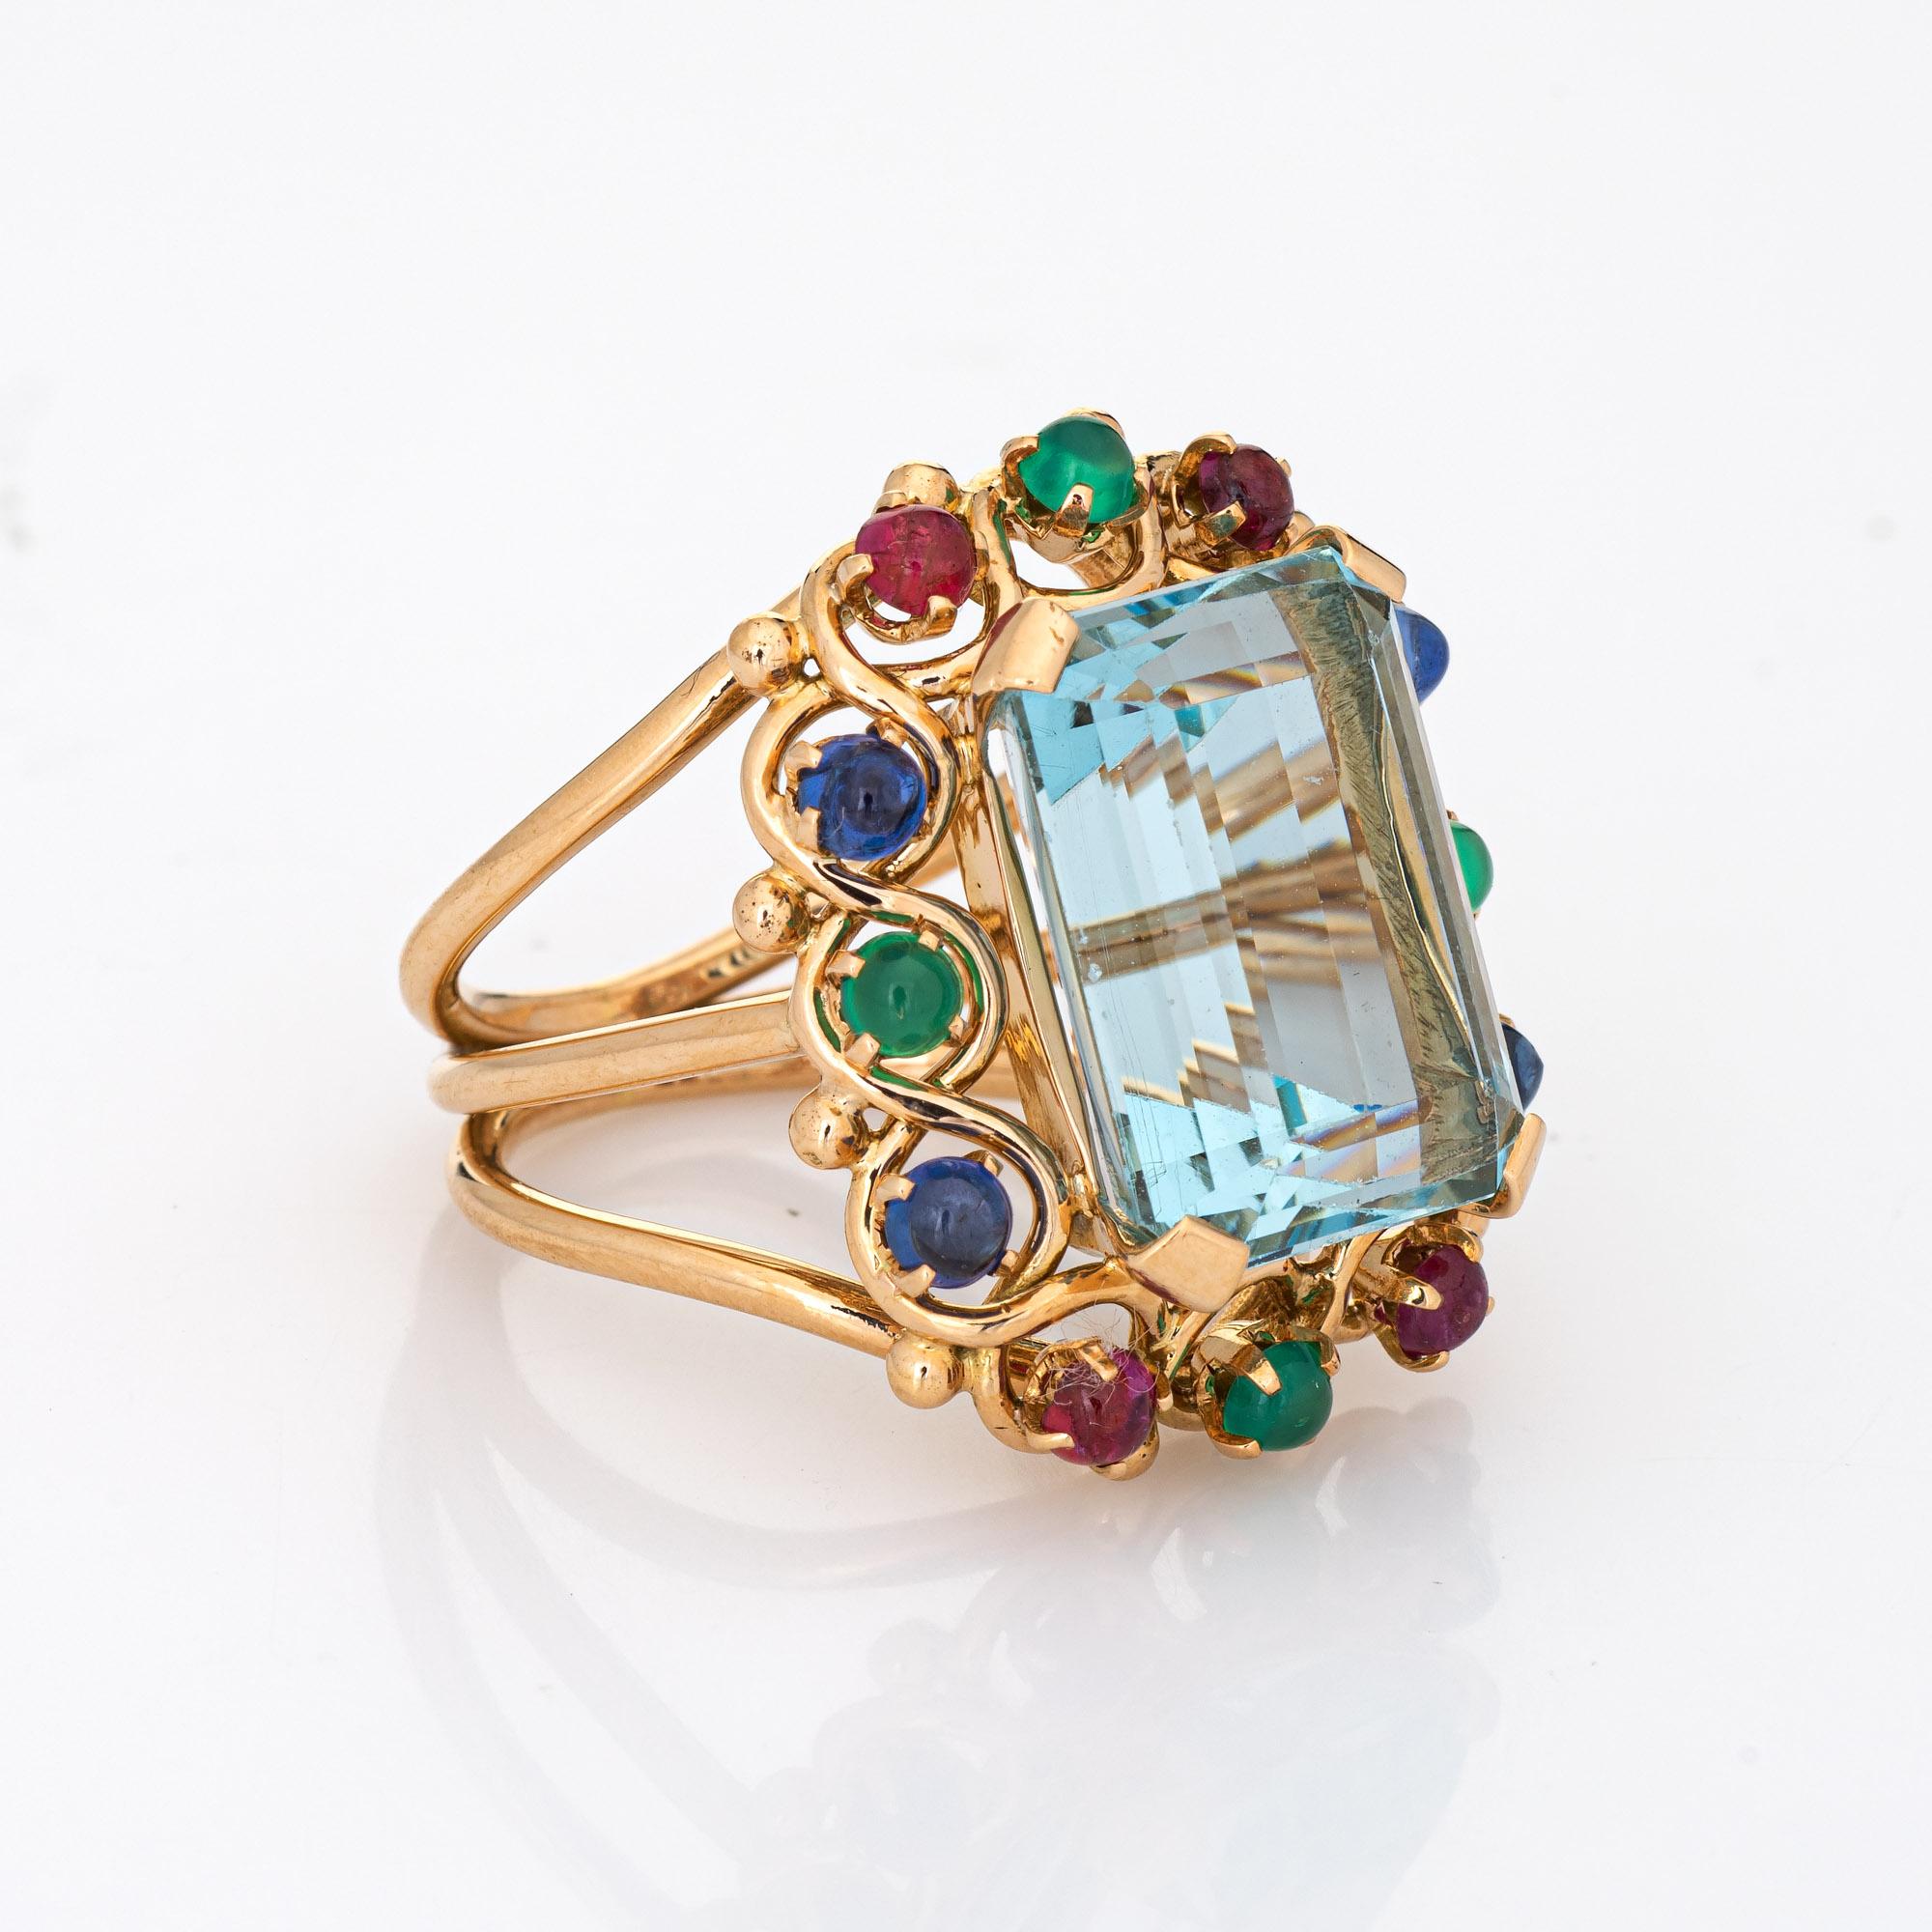 Modern 16.50ct Aquamarine Gemstone Ring Vintage 14k Yellow Gold Cocktail Jewelry For Sale